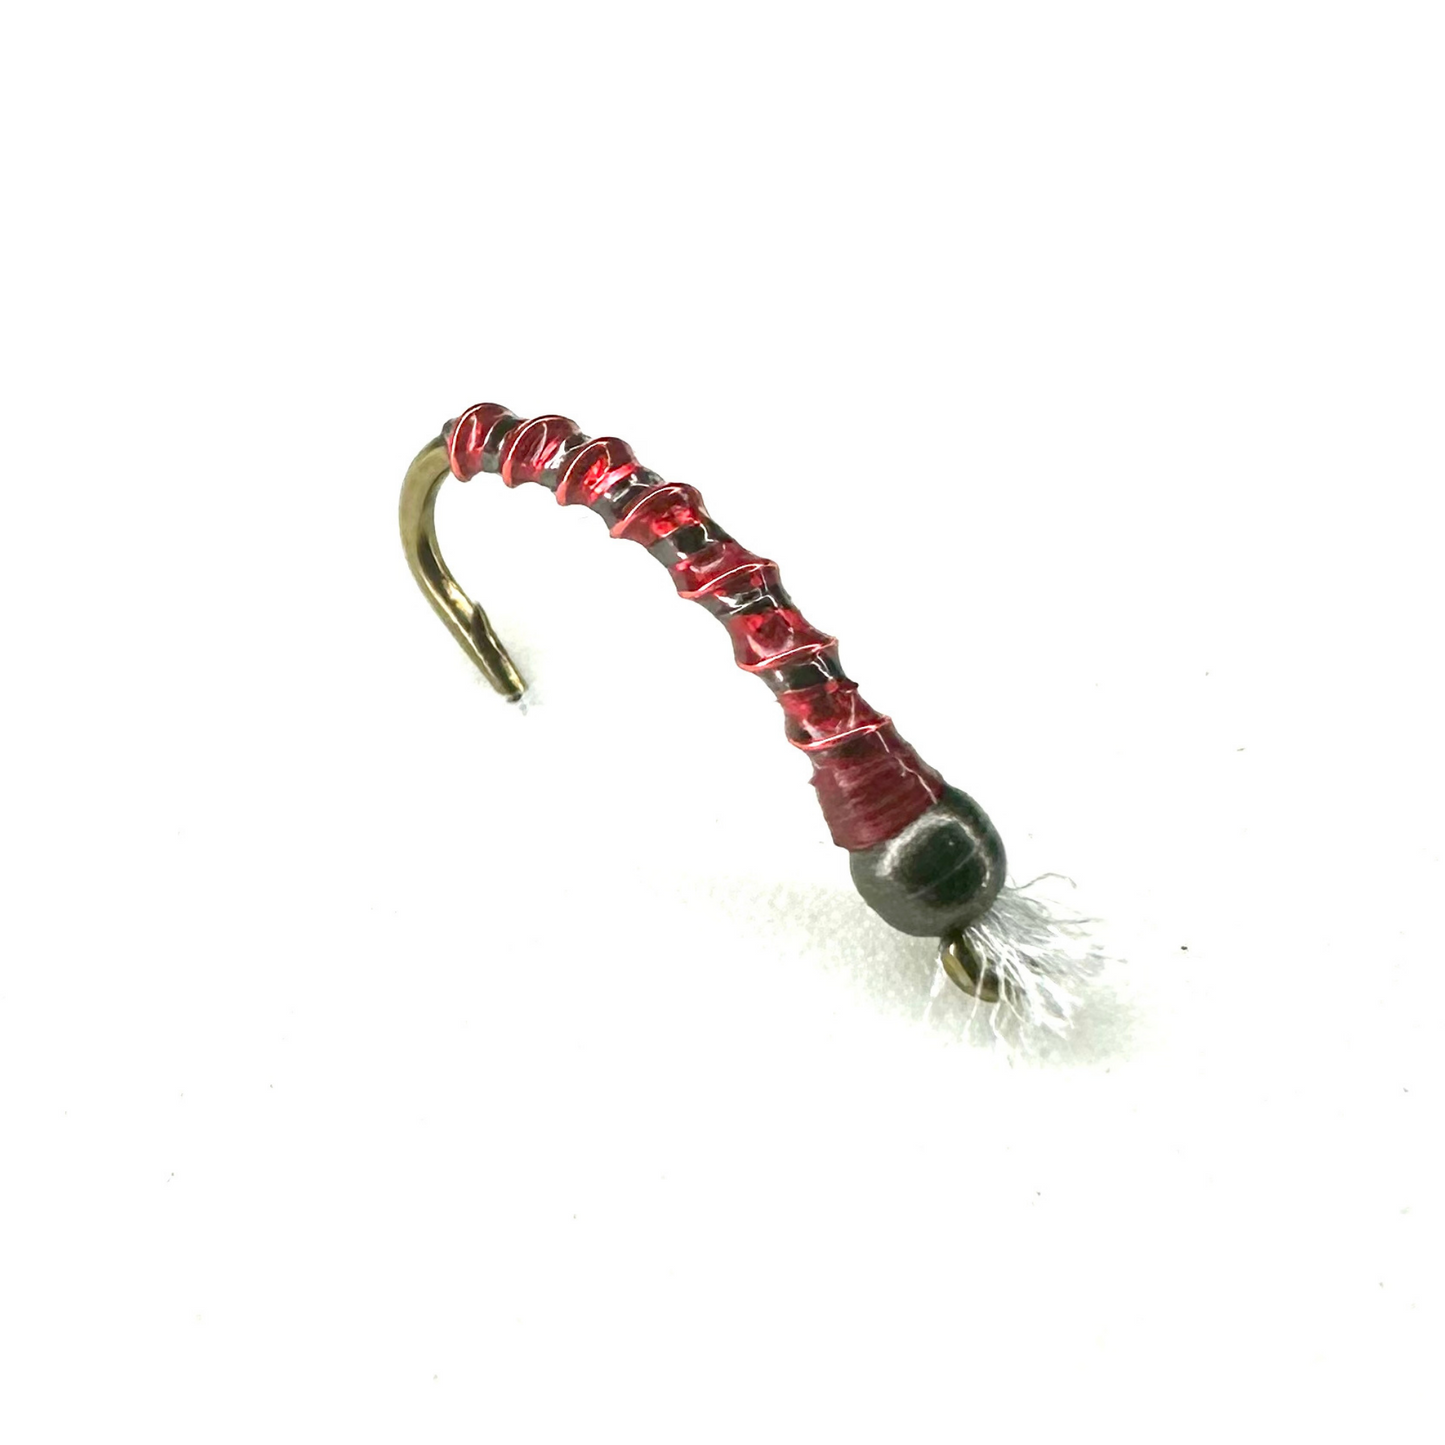 Holographic Bloodworm